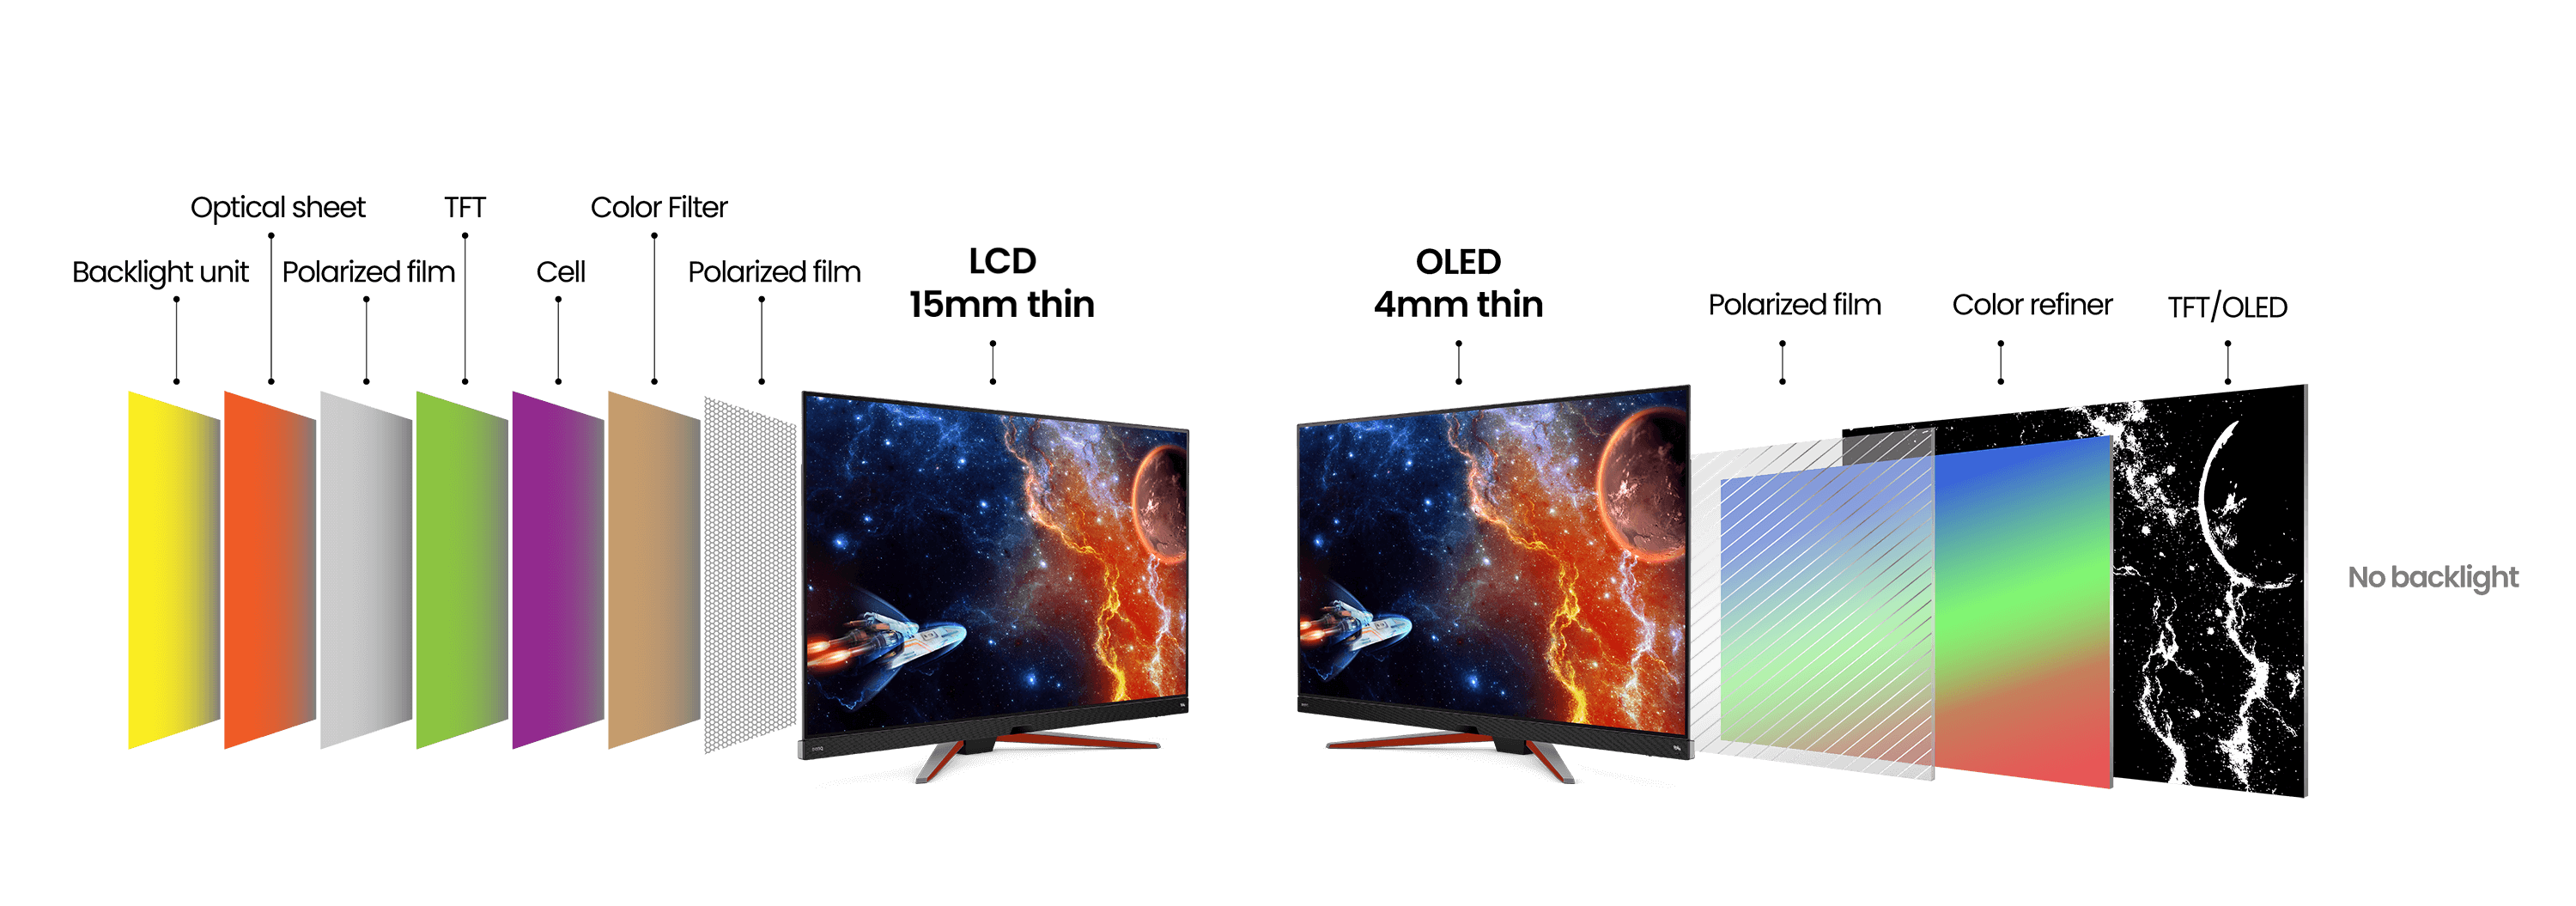 OLED monitors have excellent image quality with the widest color range and highest contrast levels as OLED pixels are turned off when not in use they create perfect black levels